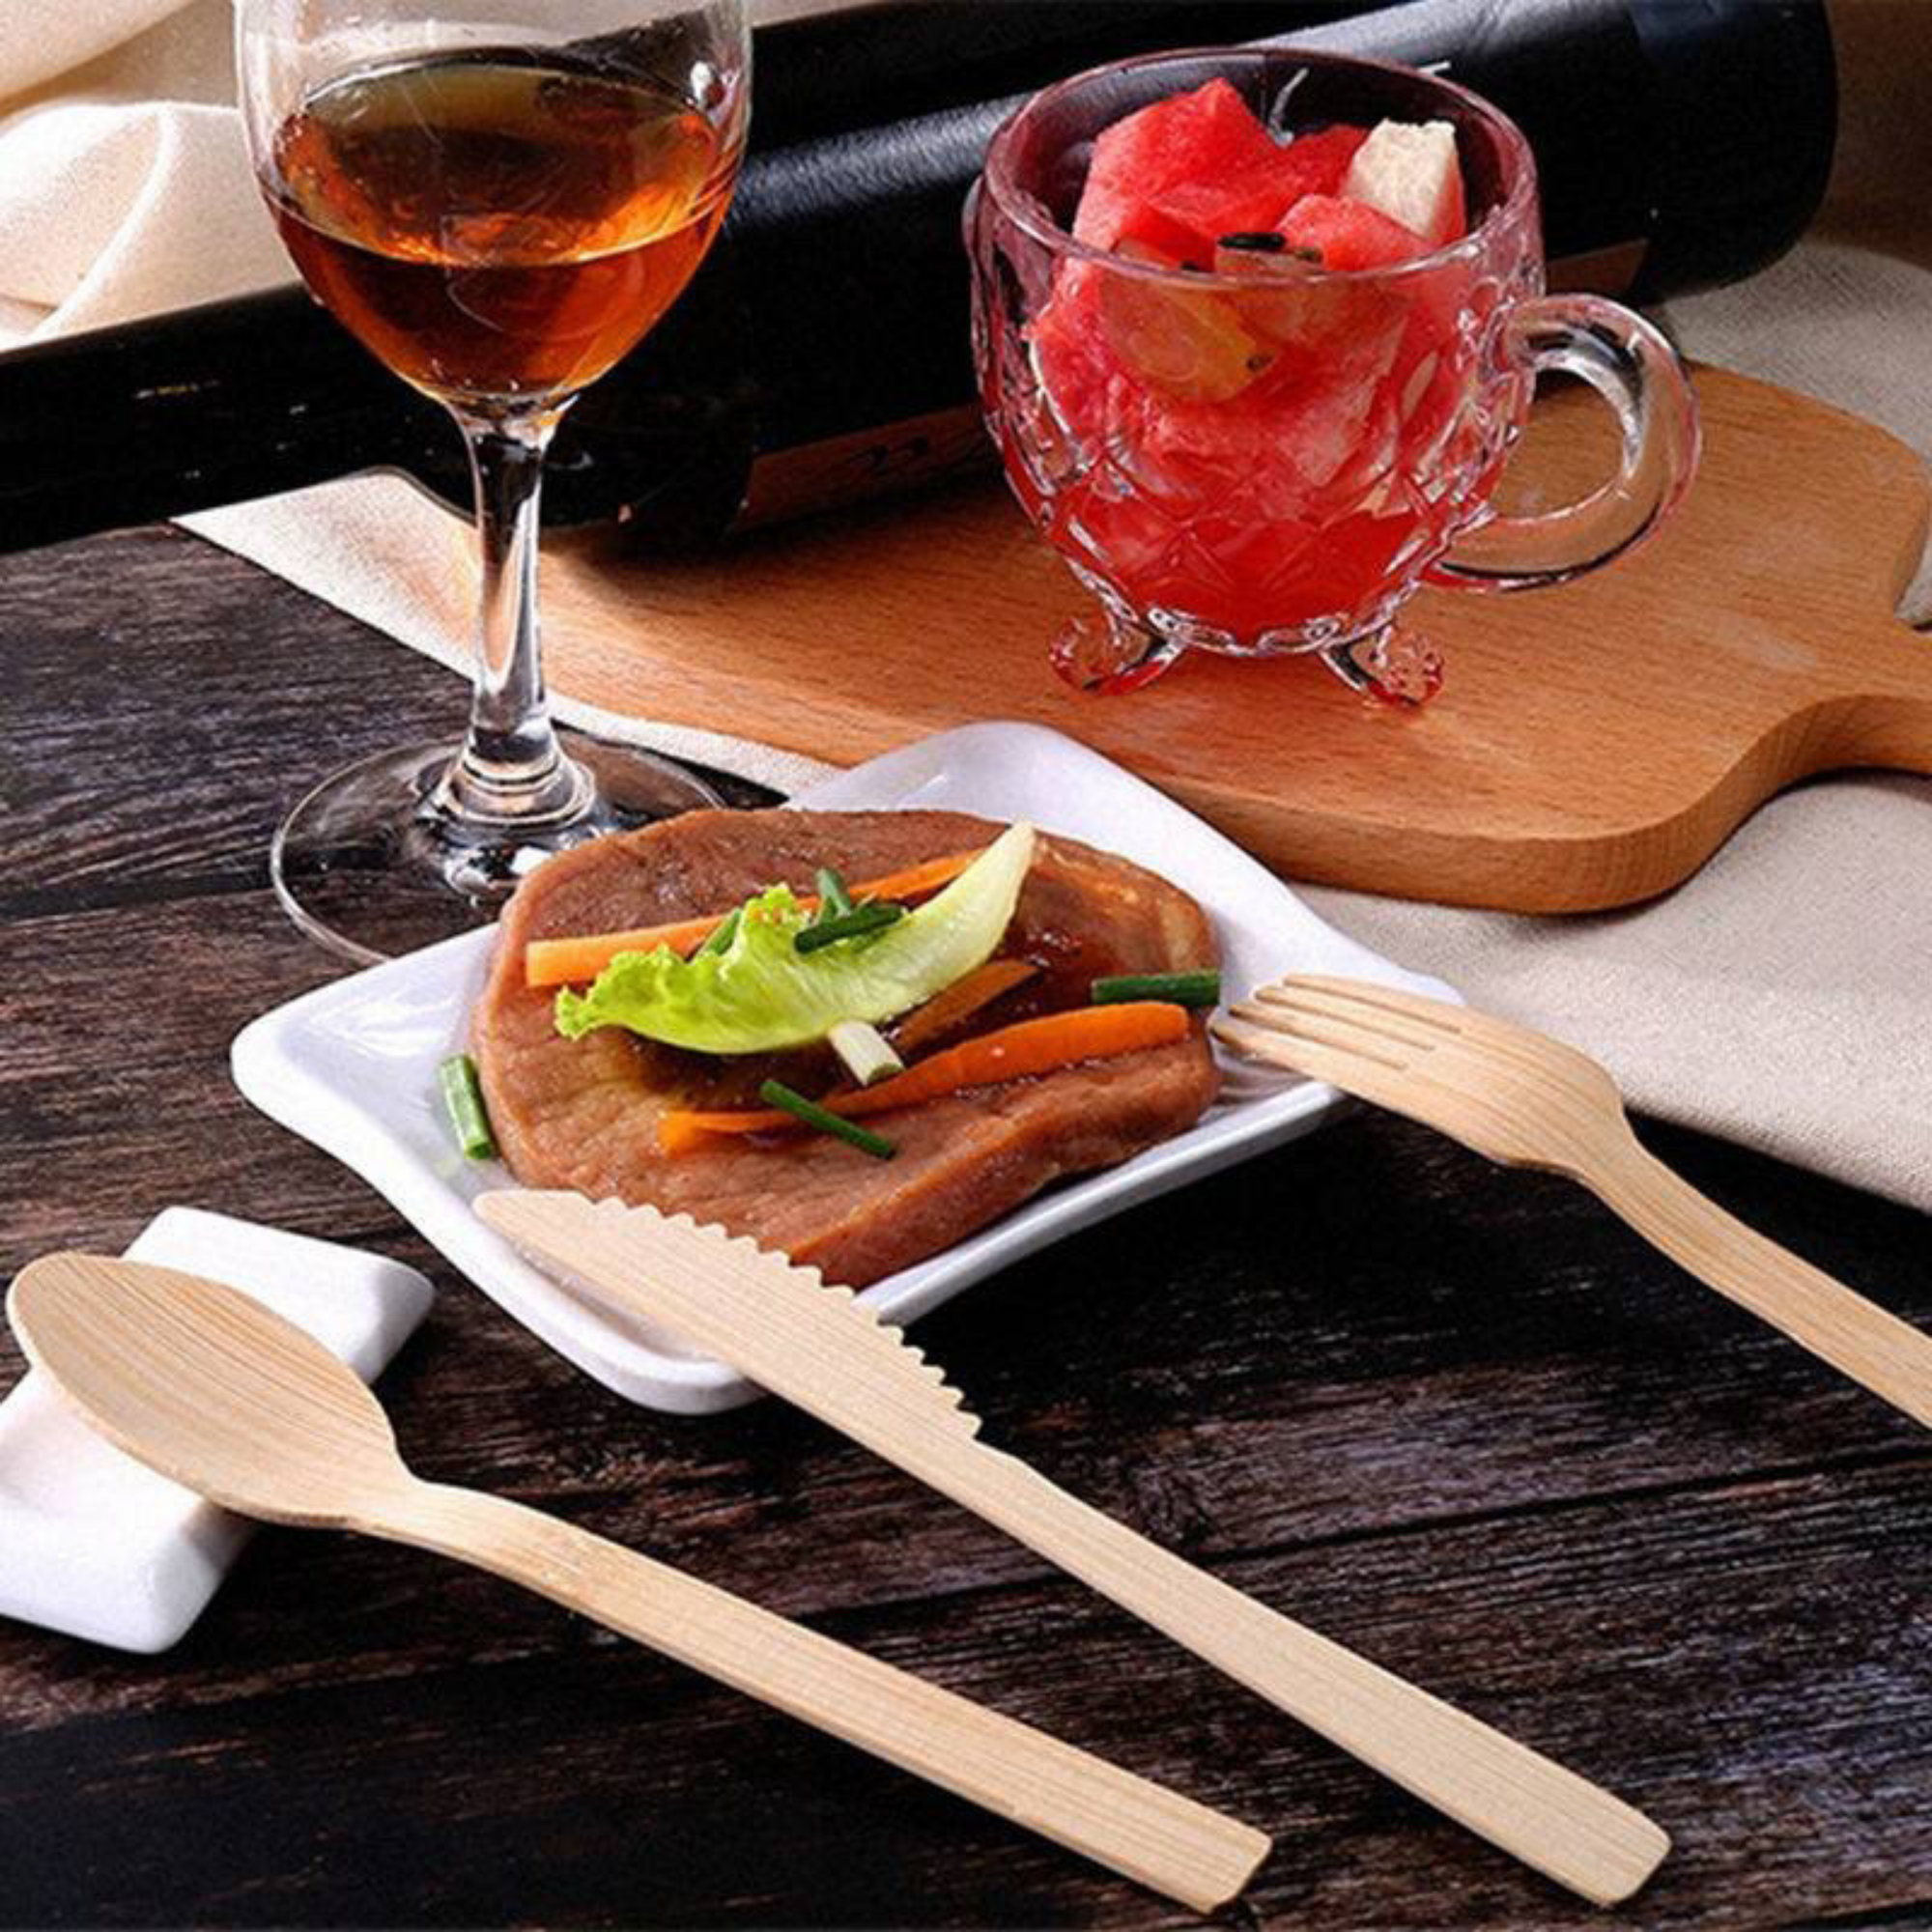 Environmentally-friendly bamboo cutlery set by Holy City Straw Co. displayed on a bamboo cutting board, with a fork, knife, and spoon visible next to slices of fresh broccoli and tomato. Icons below emphasize the utensils' features: Made from Bamboo, 100% Biodegradable, Liquid/Heat Resistant, and Zero Waste